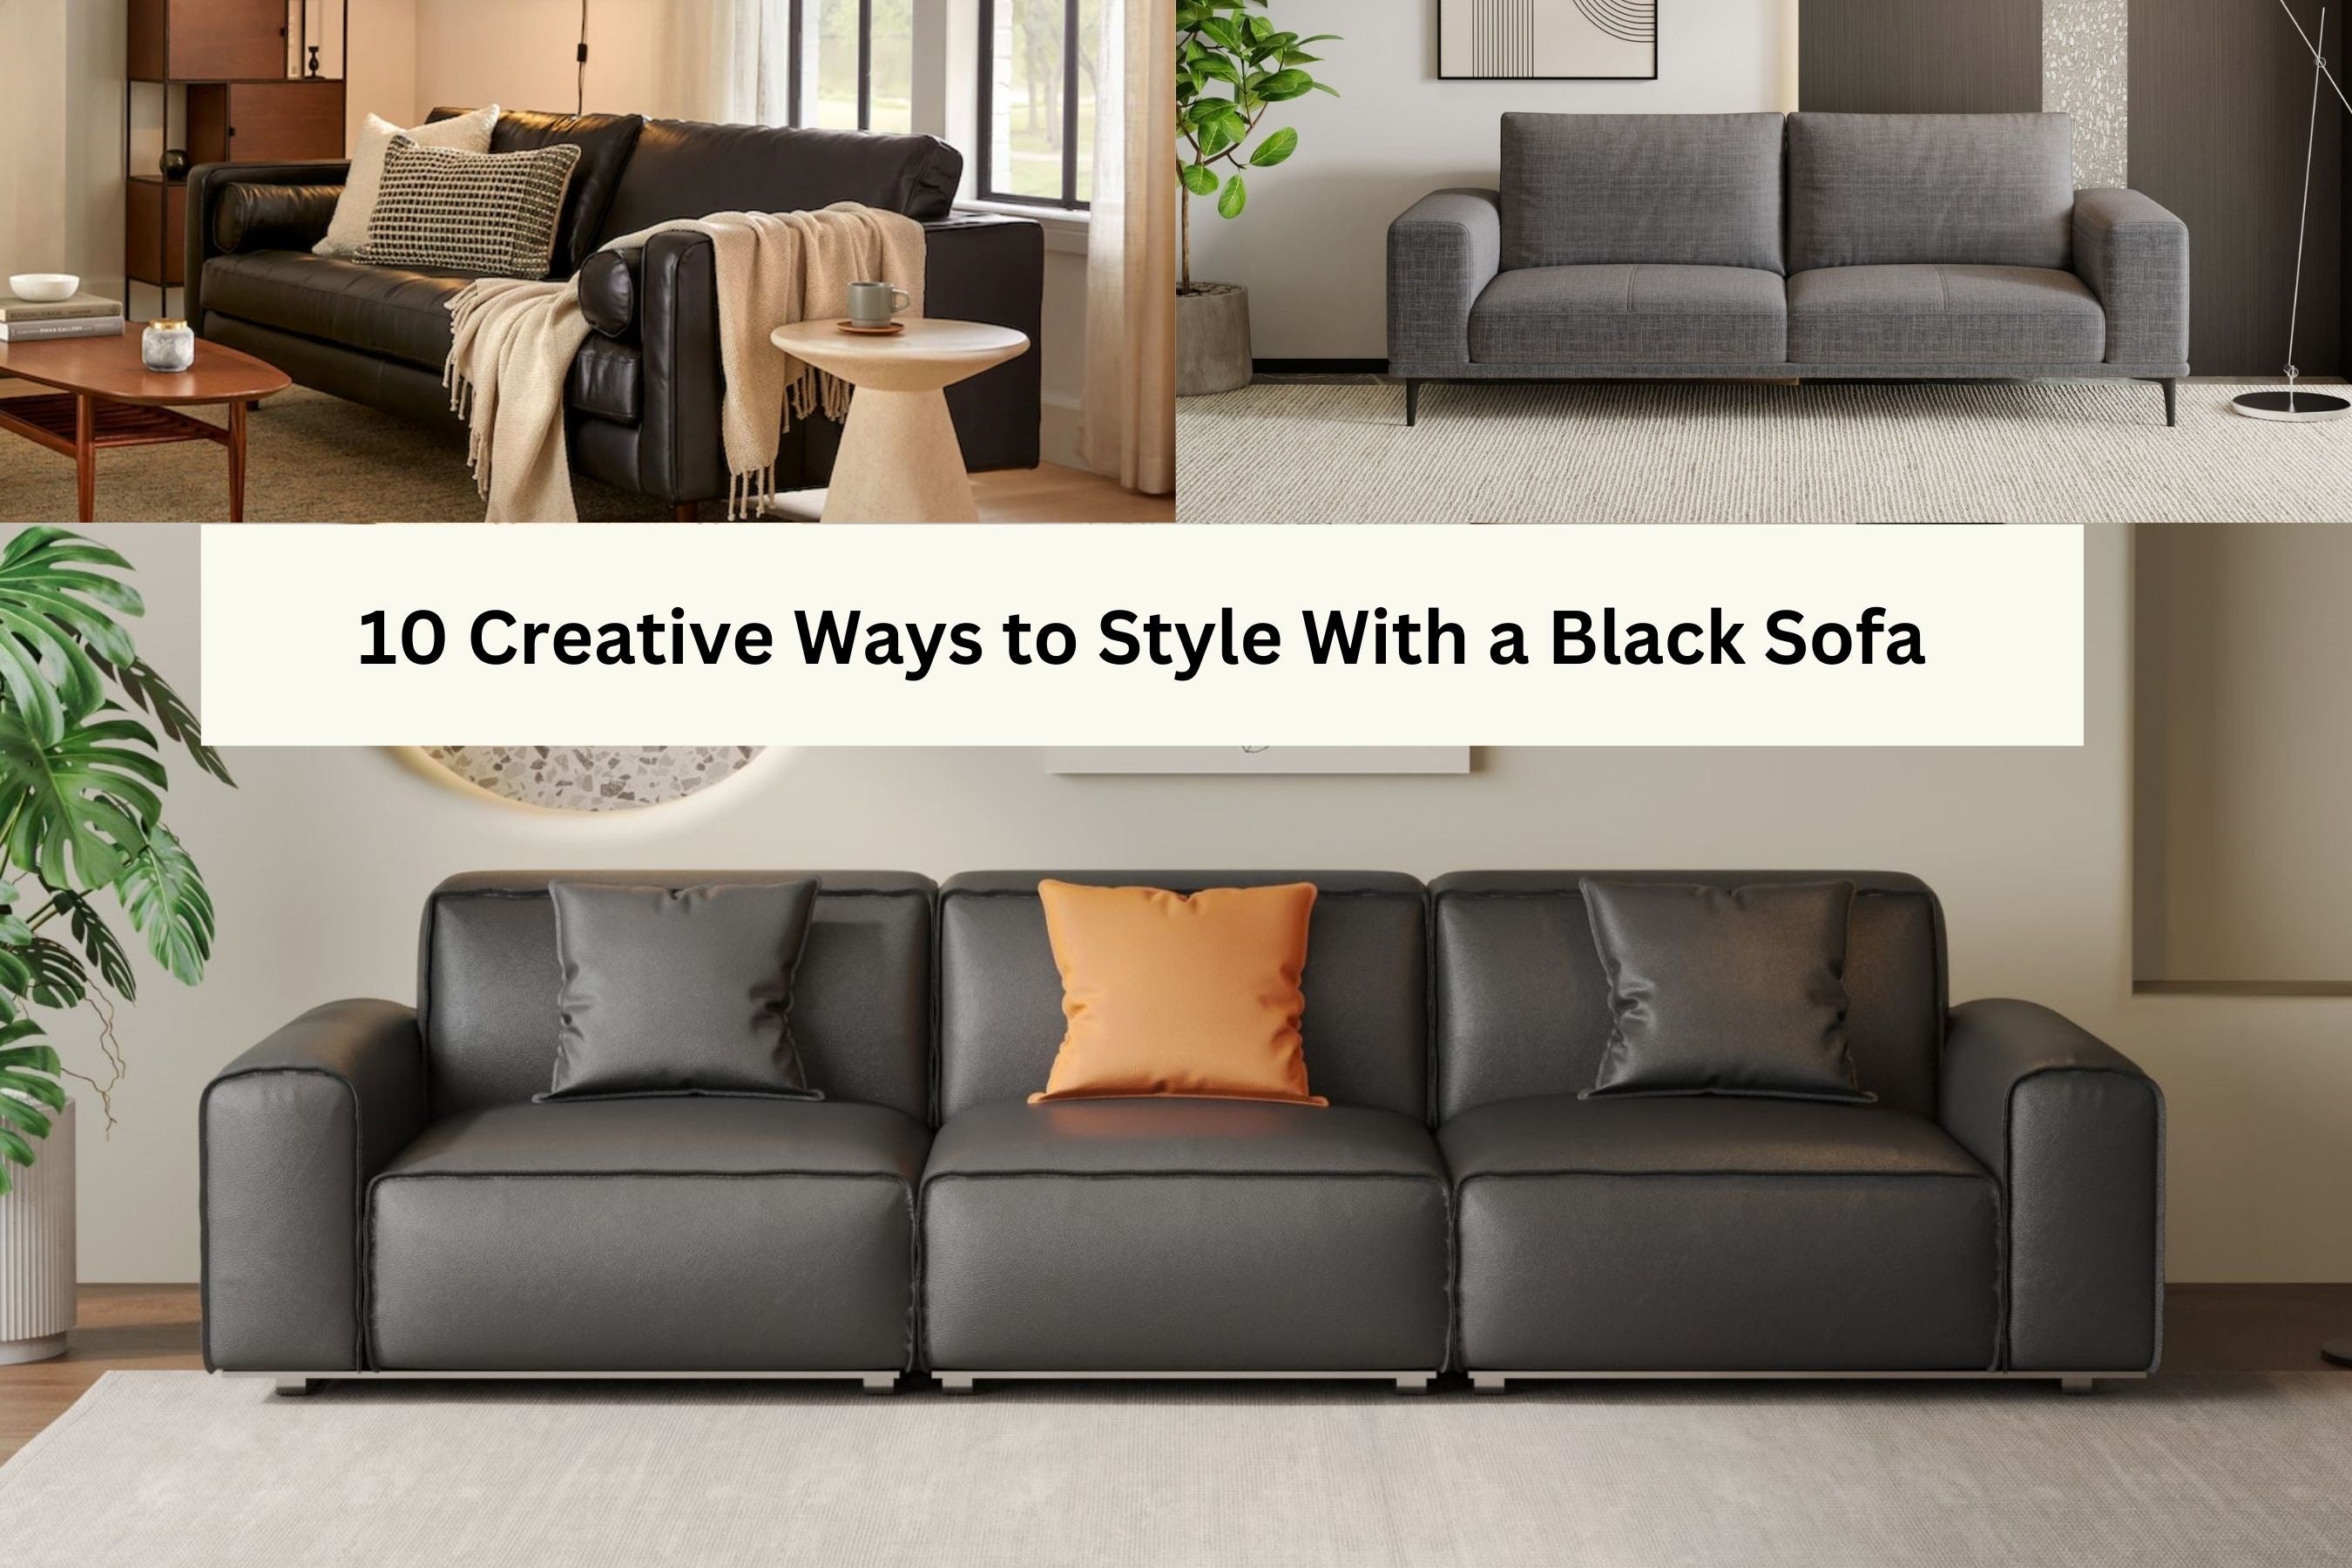 How to Cover a Leather Couch: 10 Creative Ideas